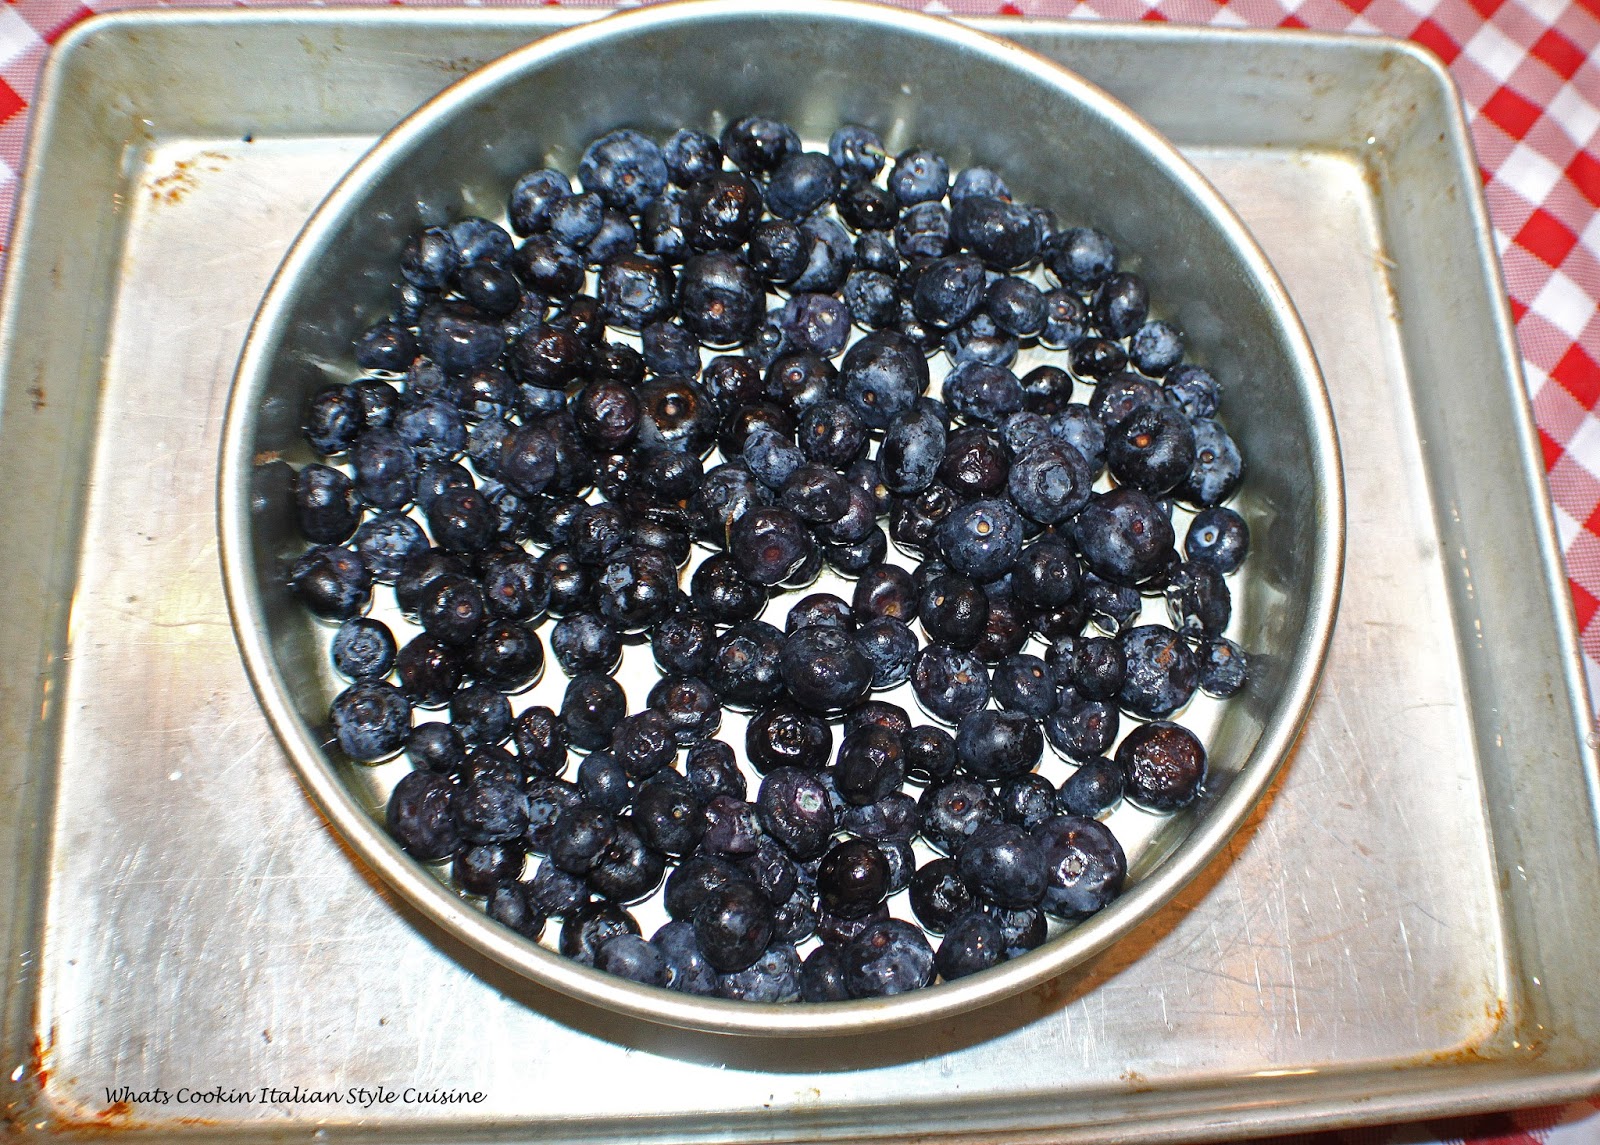 Blueberries in a round pan ready for the batter for flan. The egg mixture will pour on top of the blueberries preparing to make the flan